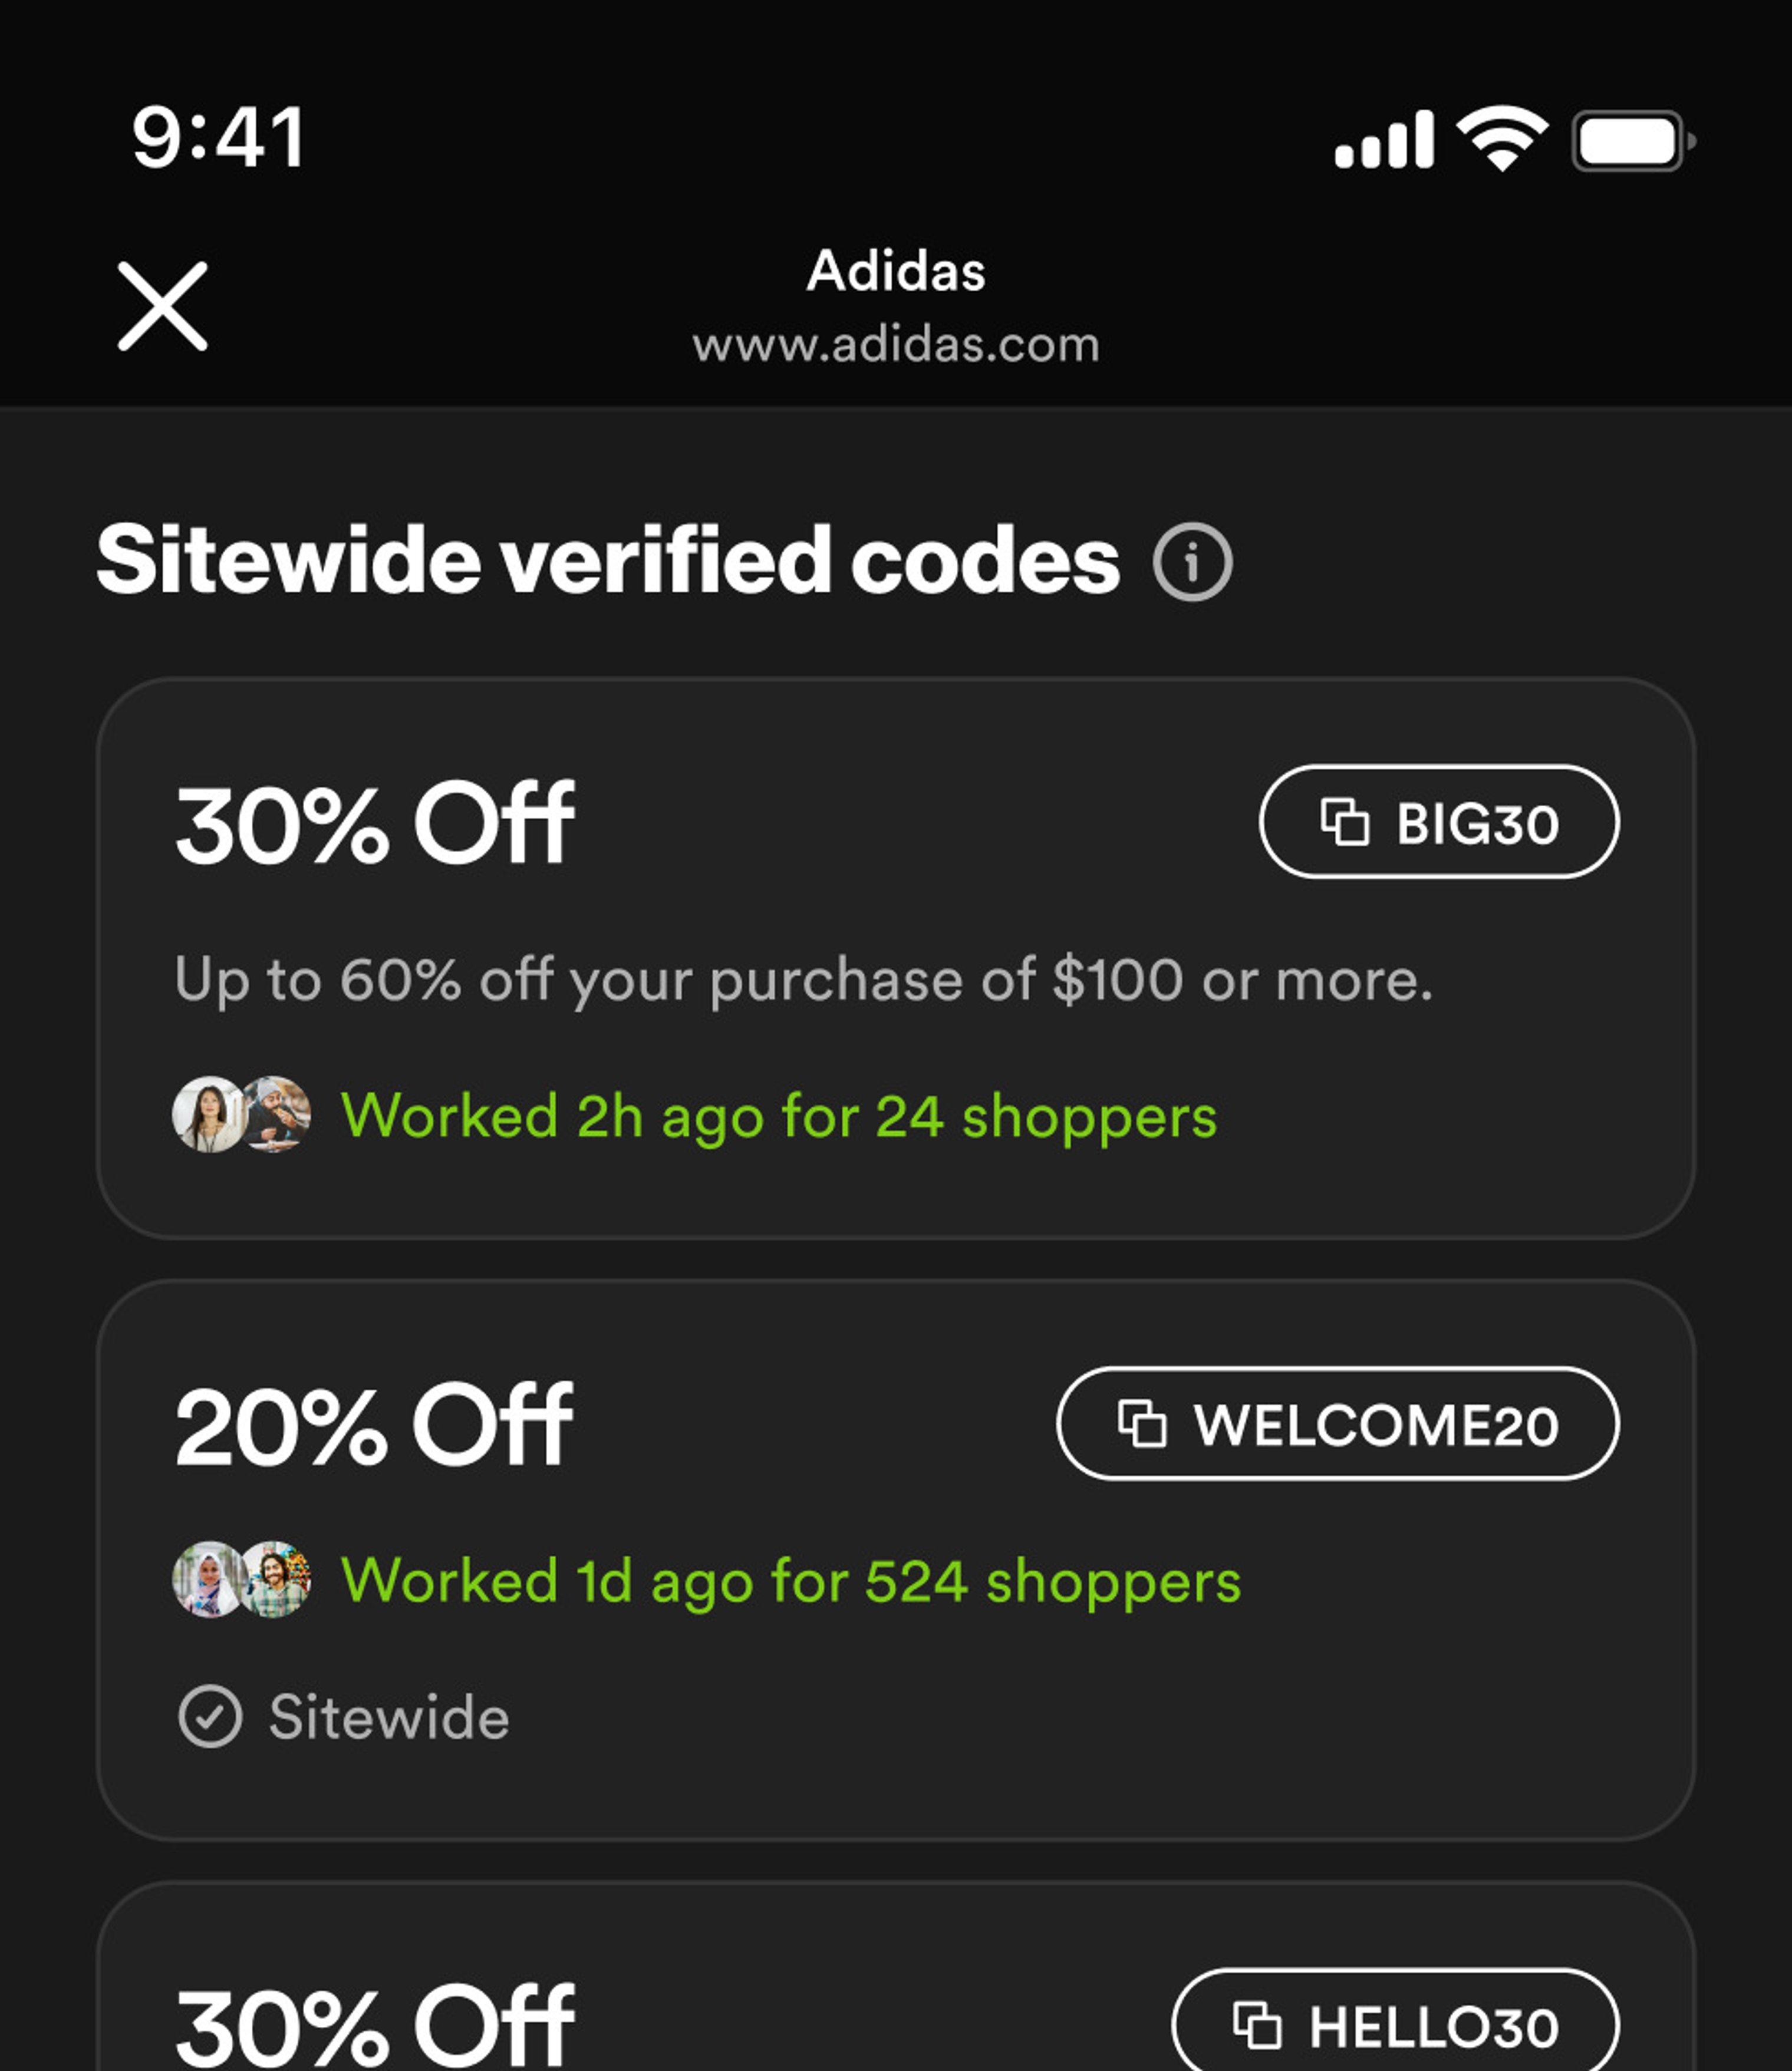 SimplyCodes providing promo codes that work for shopping.